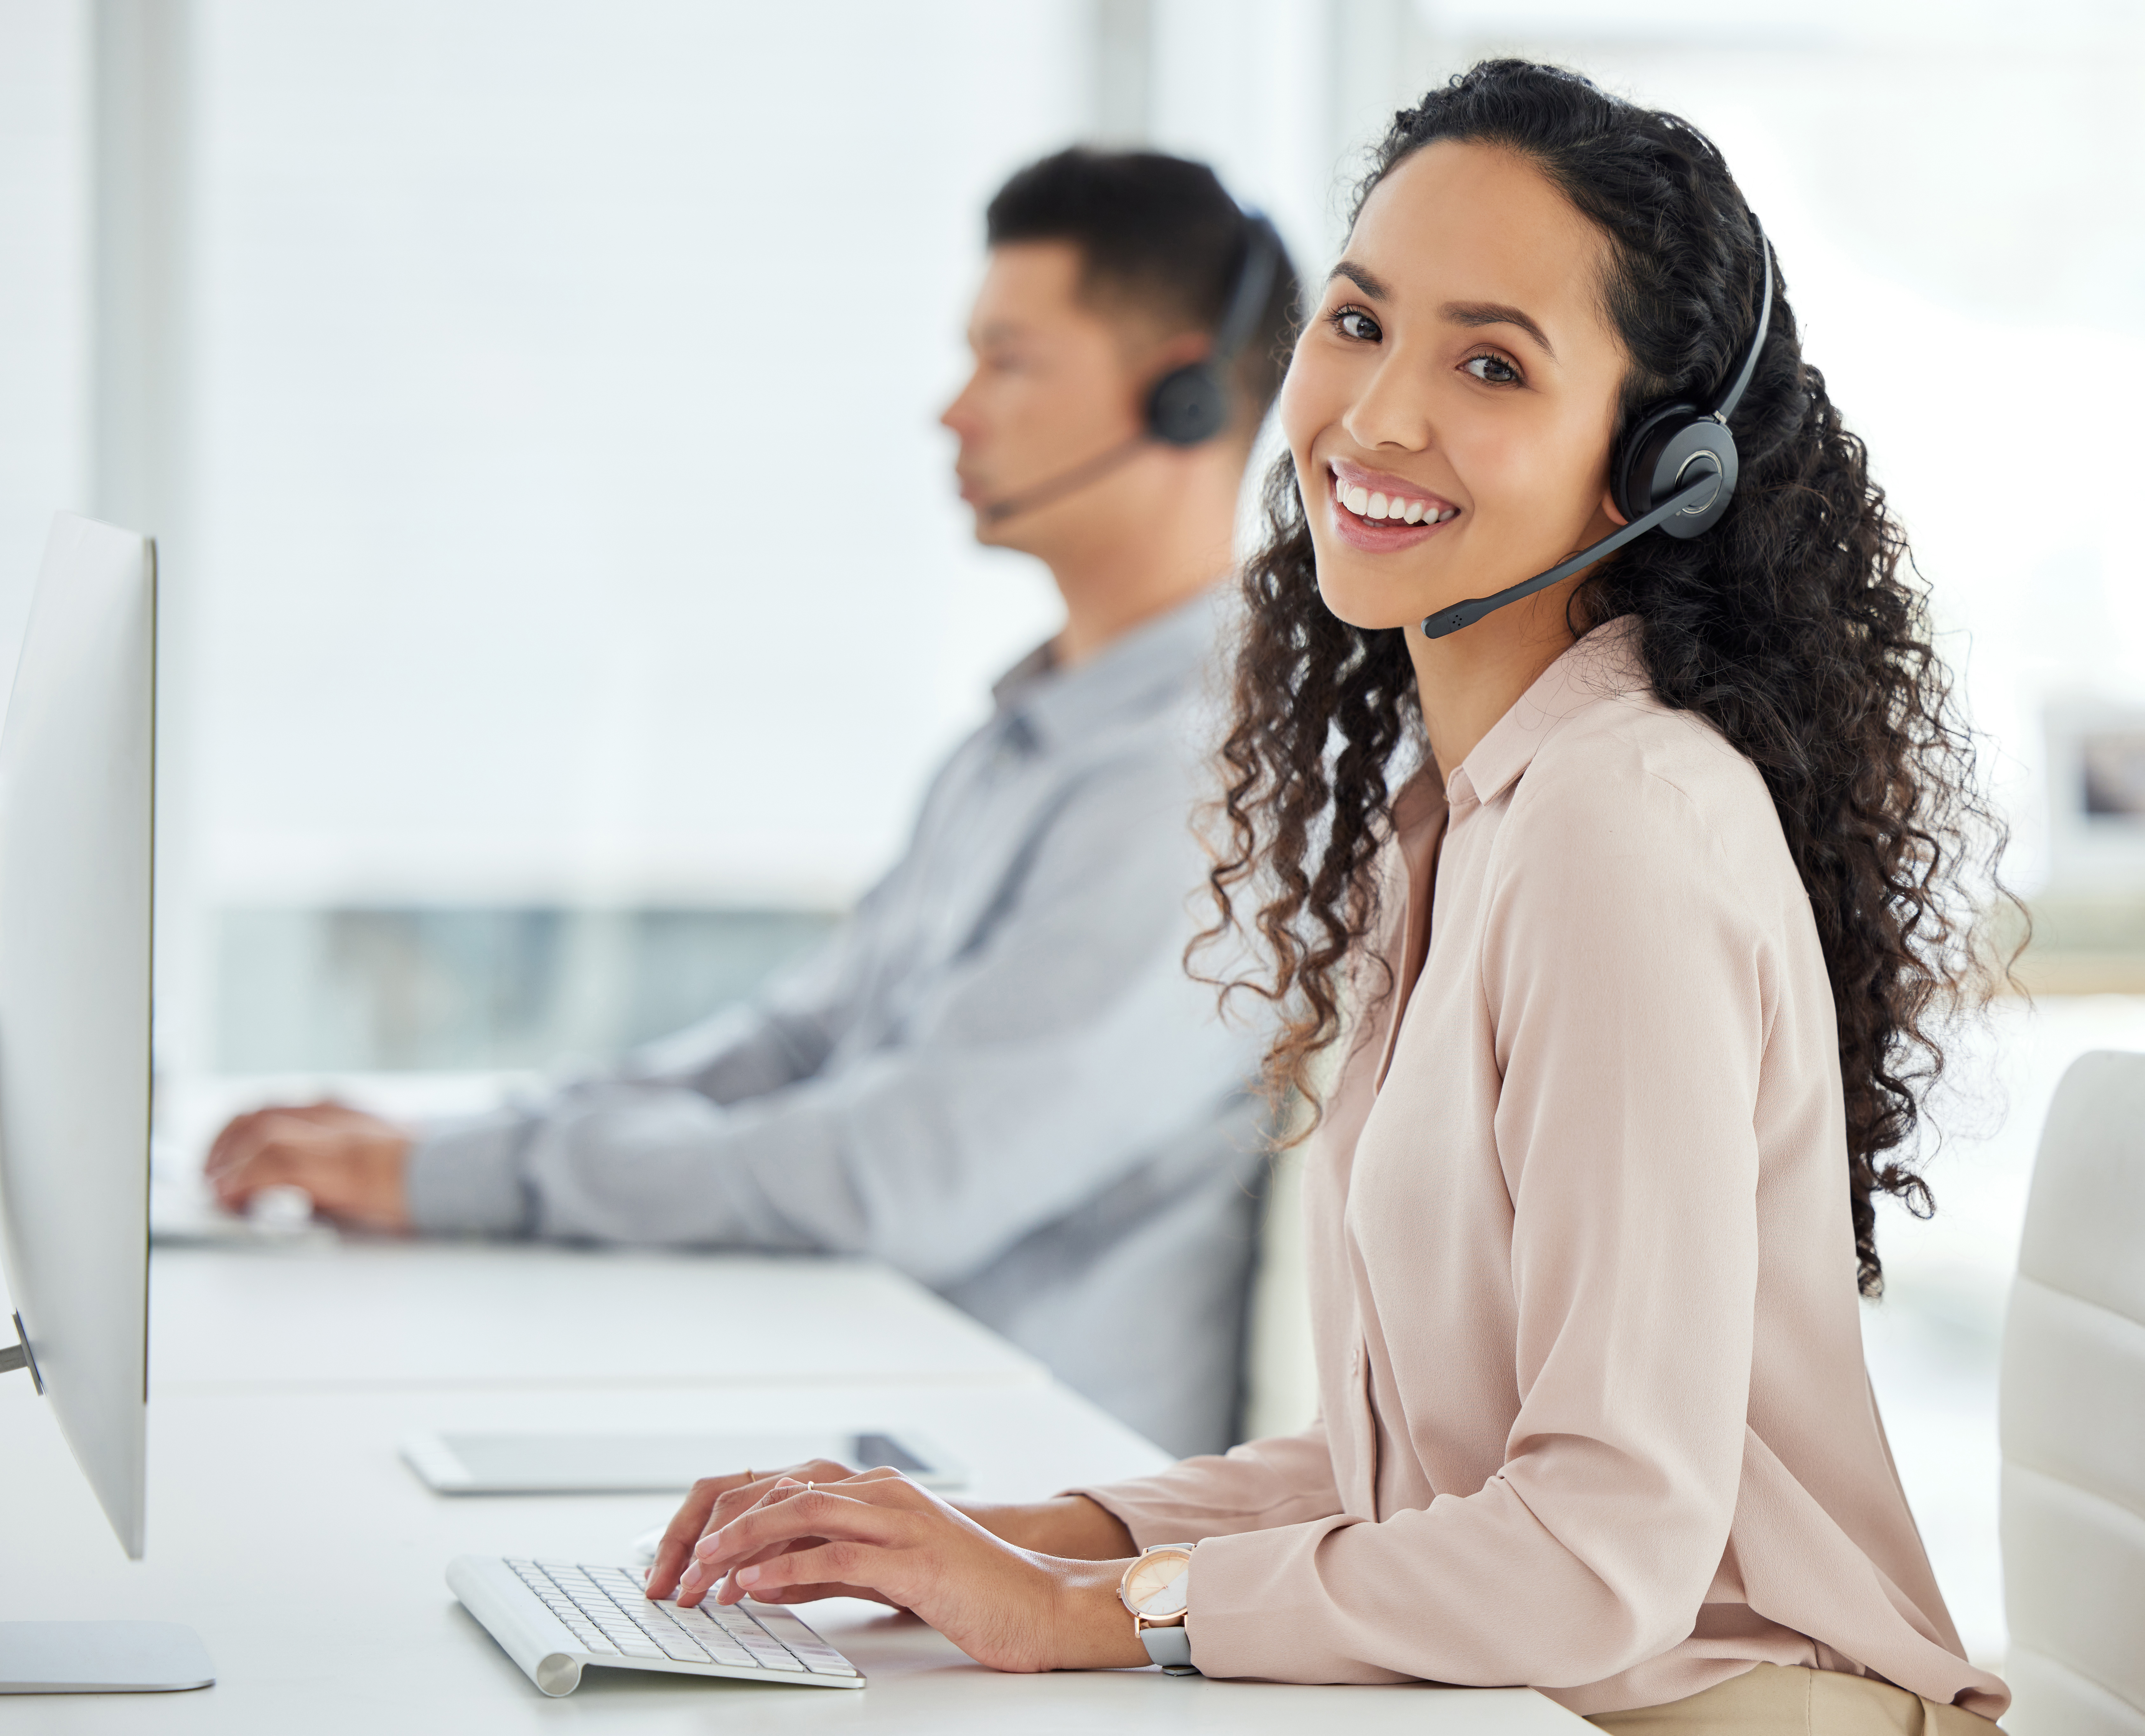 Qualities To Look for When Hiring an Answering Service